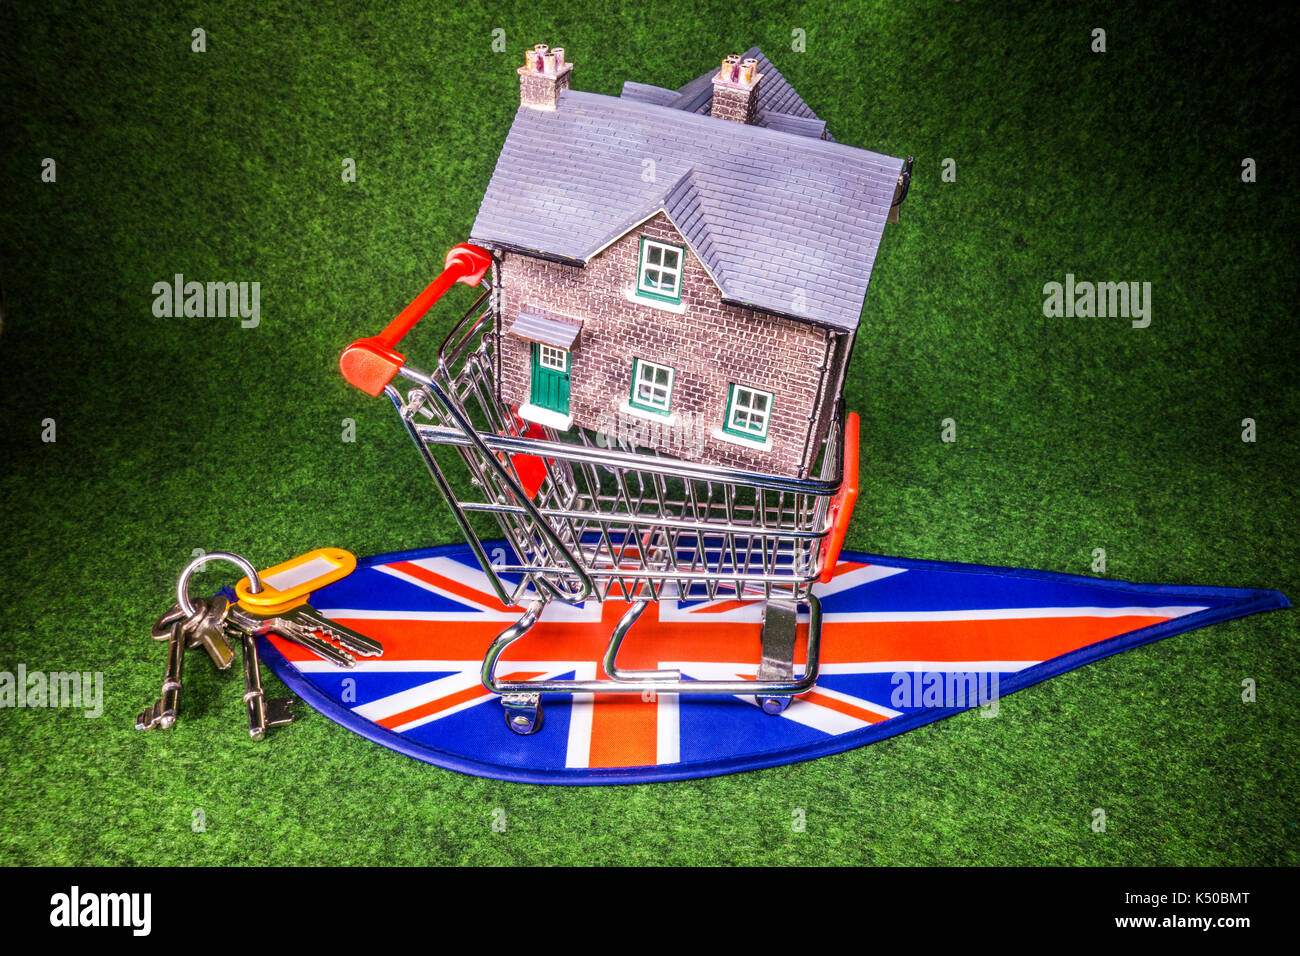 Model house in a model shopping trolley, with house keys, on Union Jack colours. A concept to depict the UK housing market of home buying or renting. Stock Photo